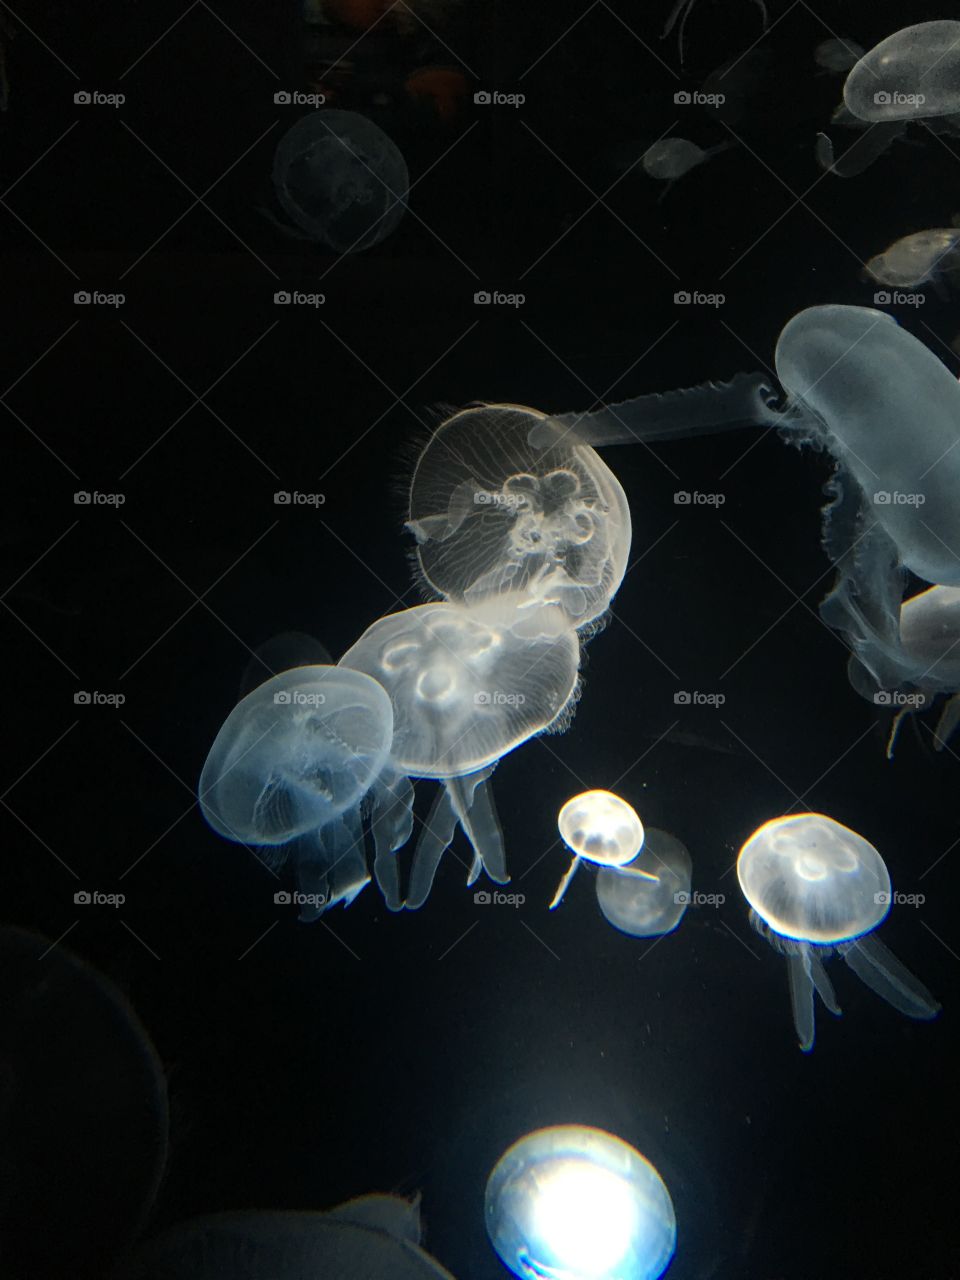 A little collection of jellyfish captured inside an exhibit in an Aquarium. Dark background contrasts with the light jellyfish. 